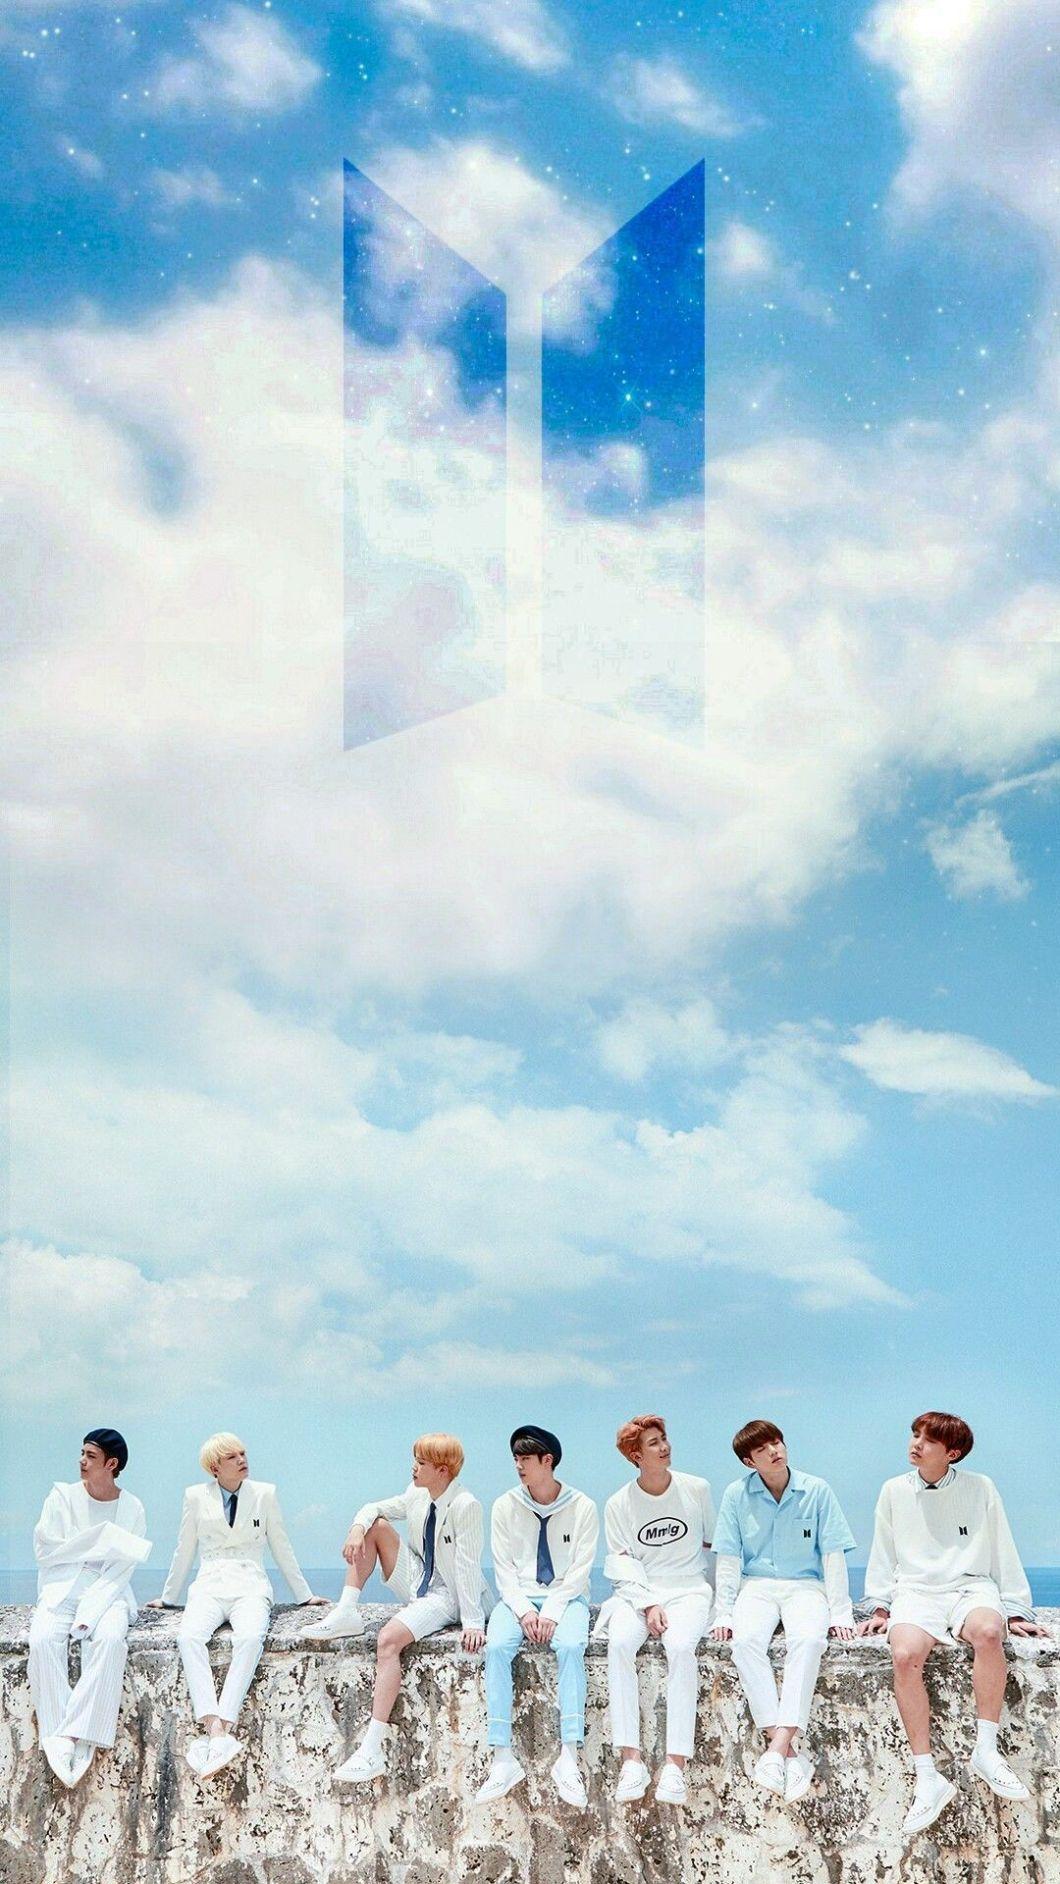 BTS 2018 Wallpaper for iPhone, Android and Desktop!